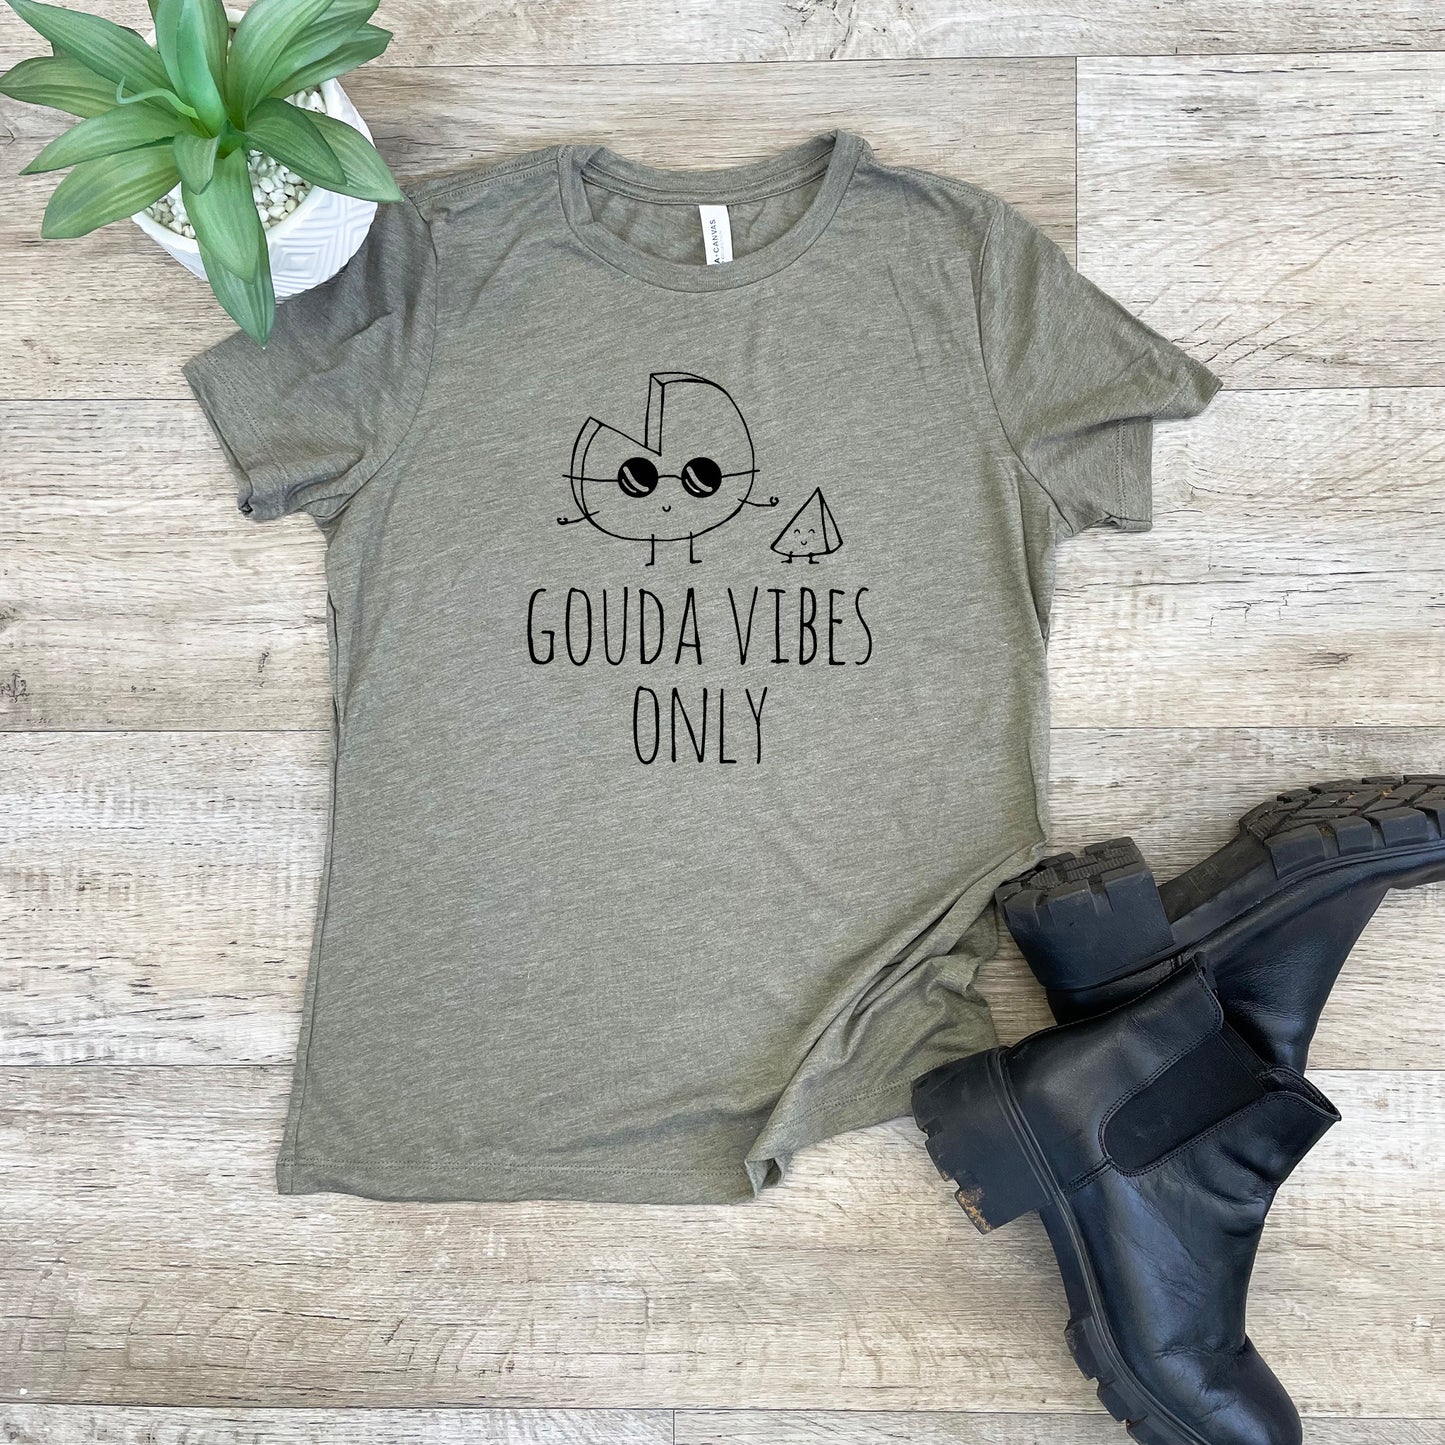 Gouda Vibes Only - Women's Crew Tee - Olive or Dusty Blue